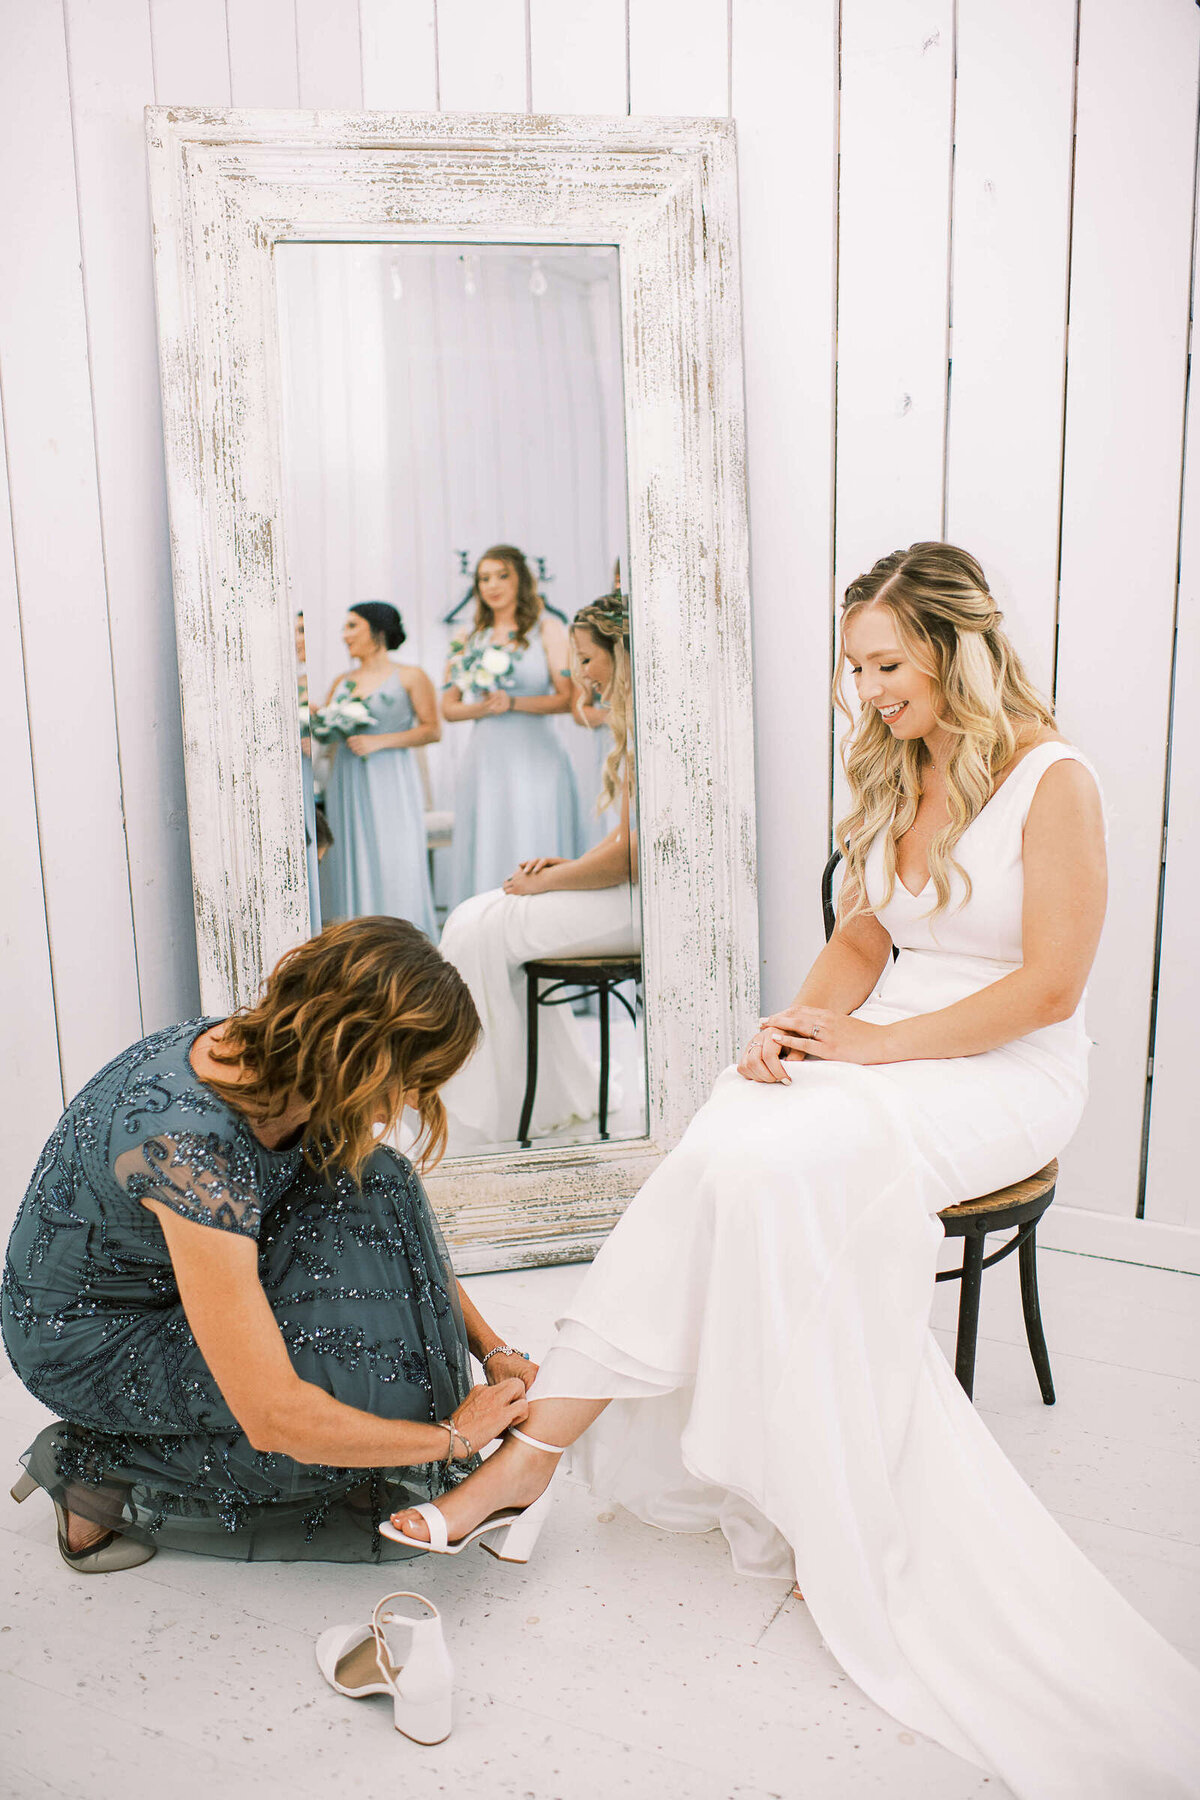 Mother of the bride helps bride put on her white wedding heels